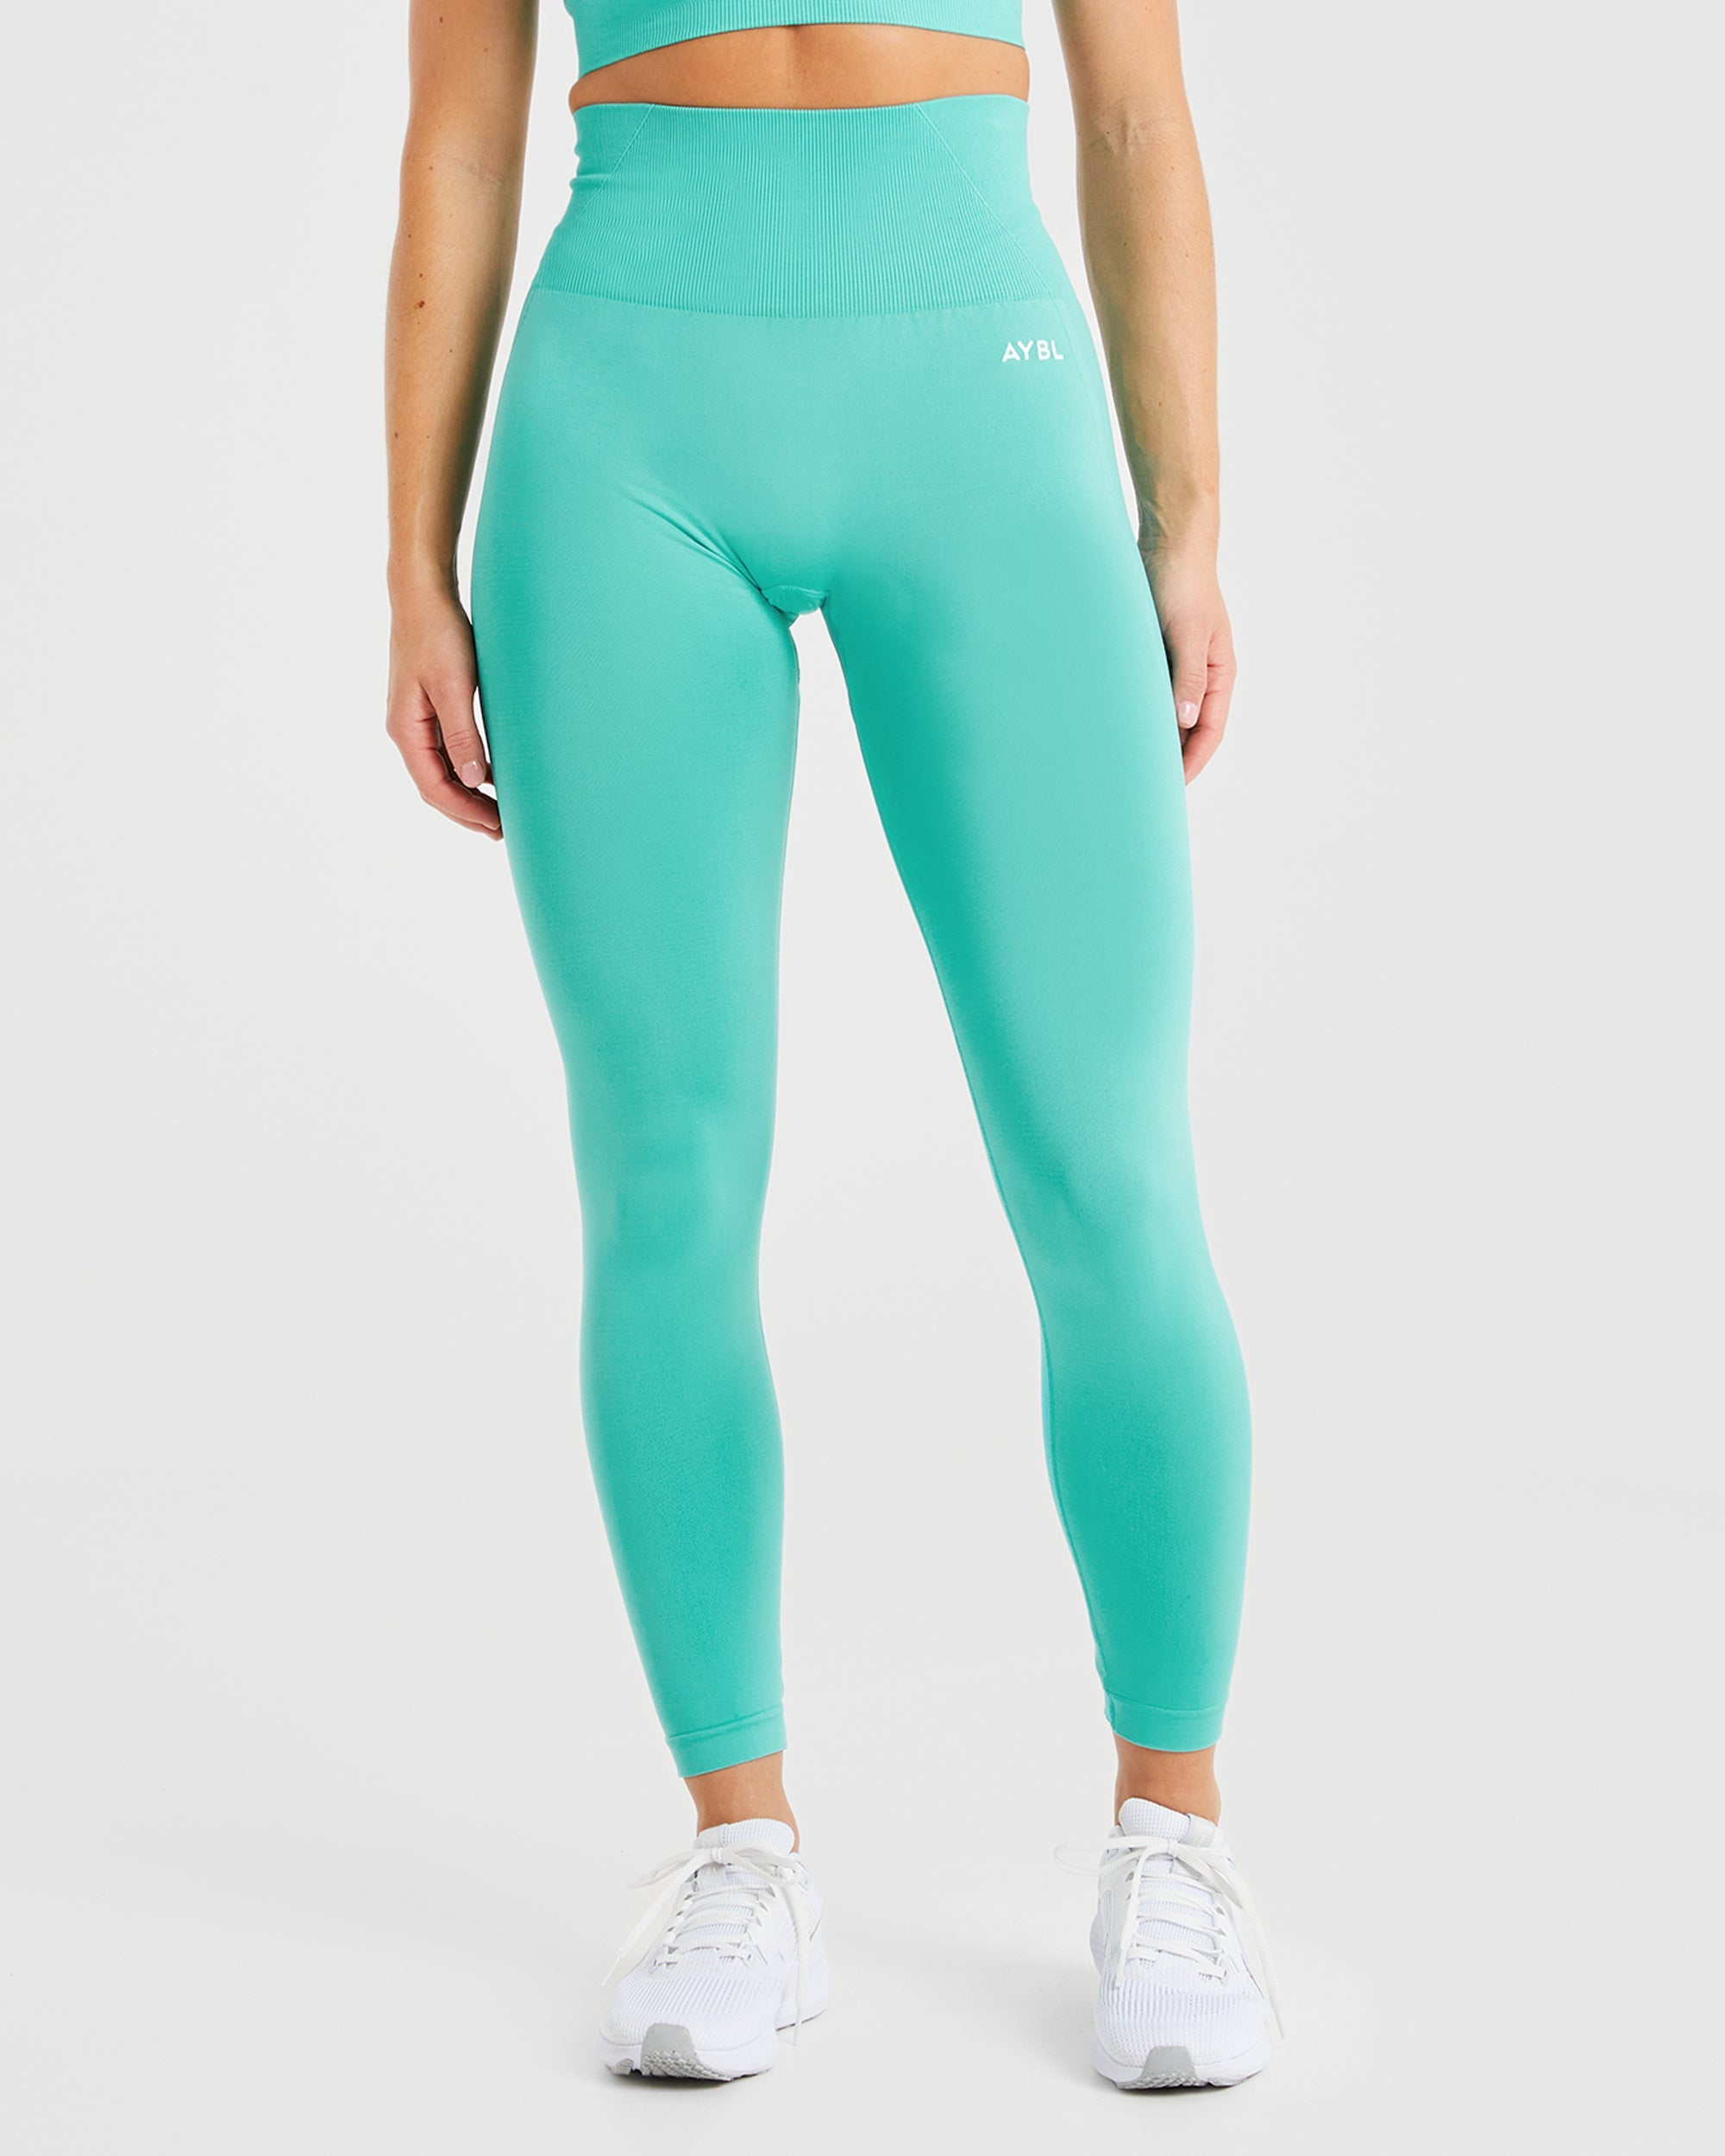 ombre green high waisted seamless workout exercise leggings size S Aybl